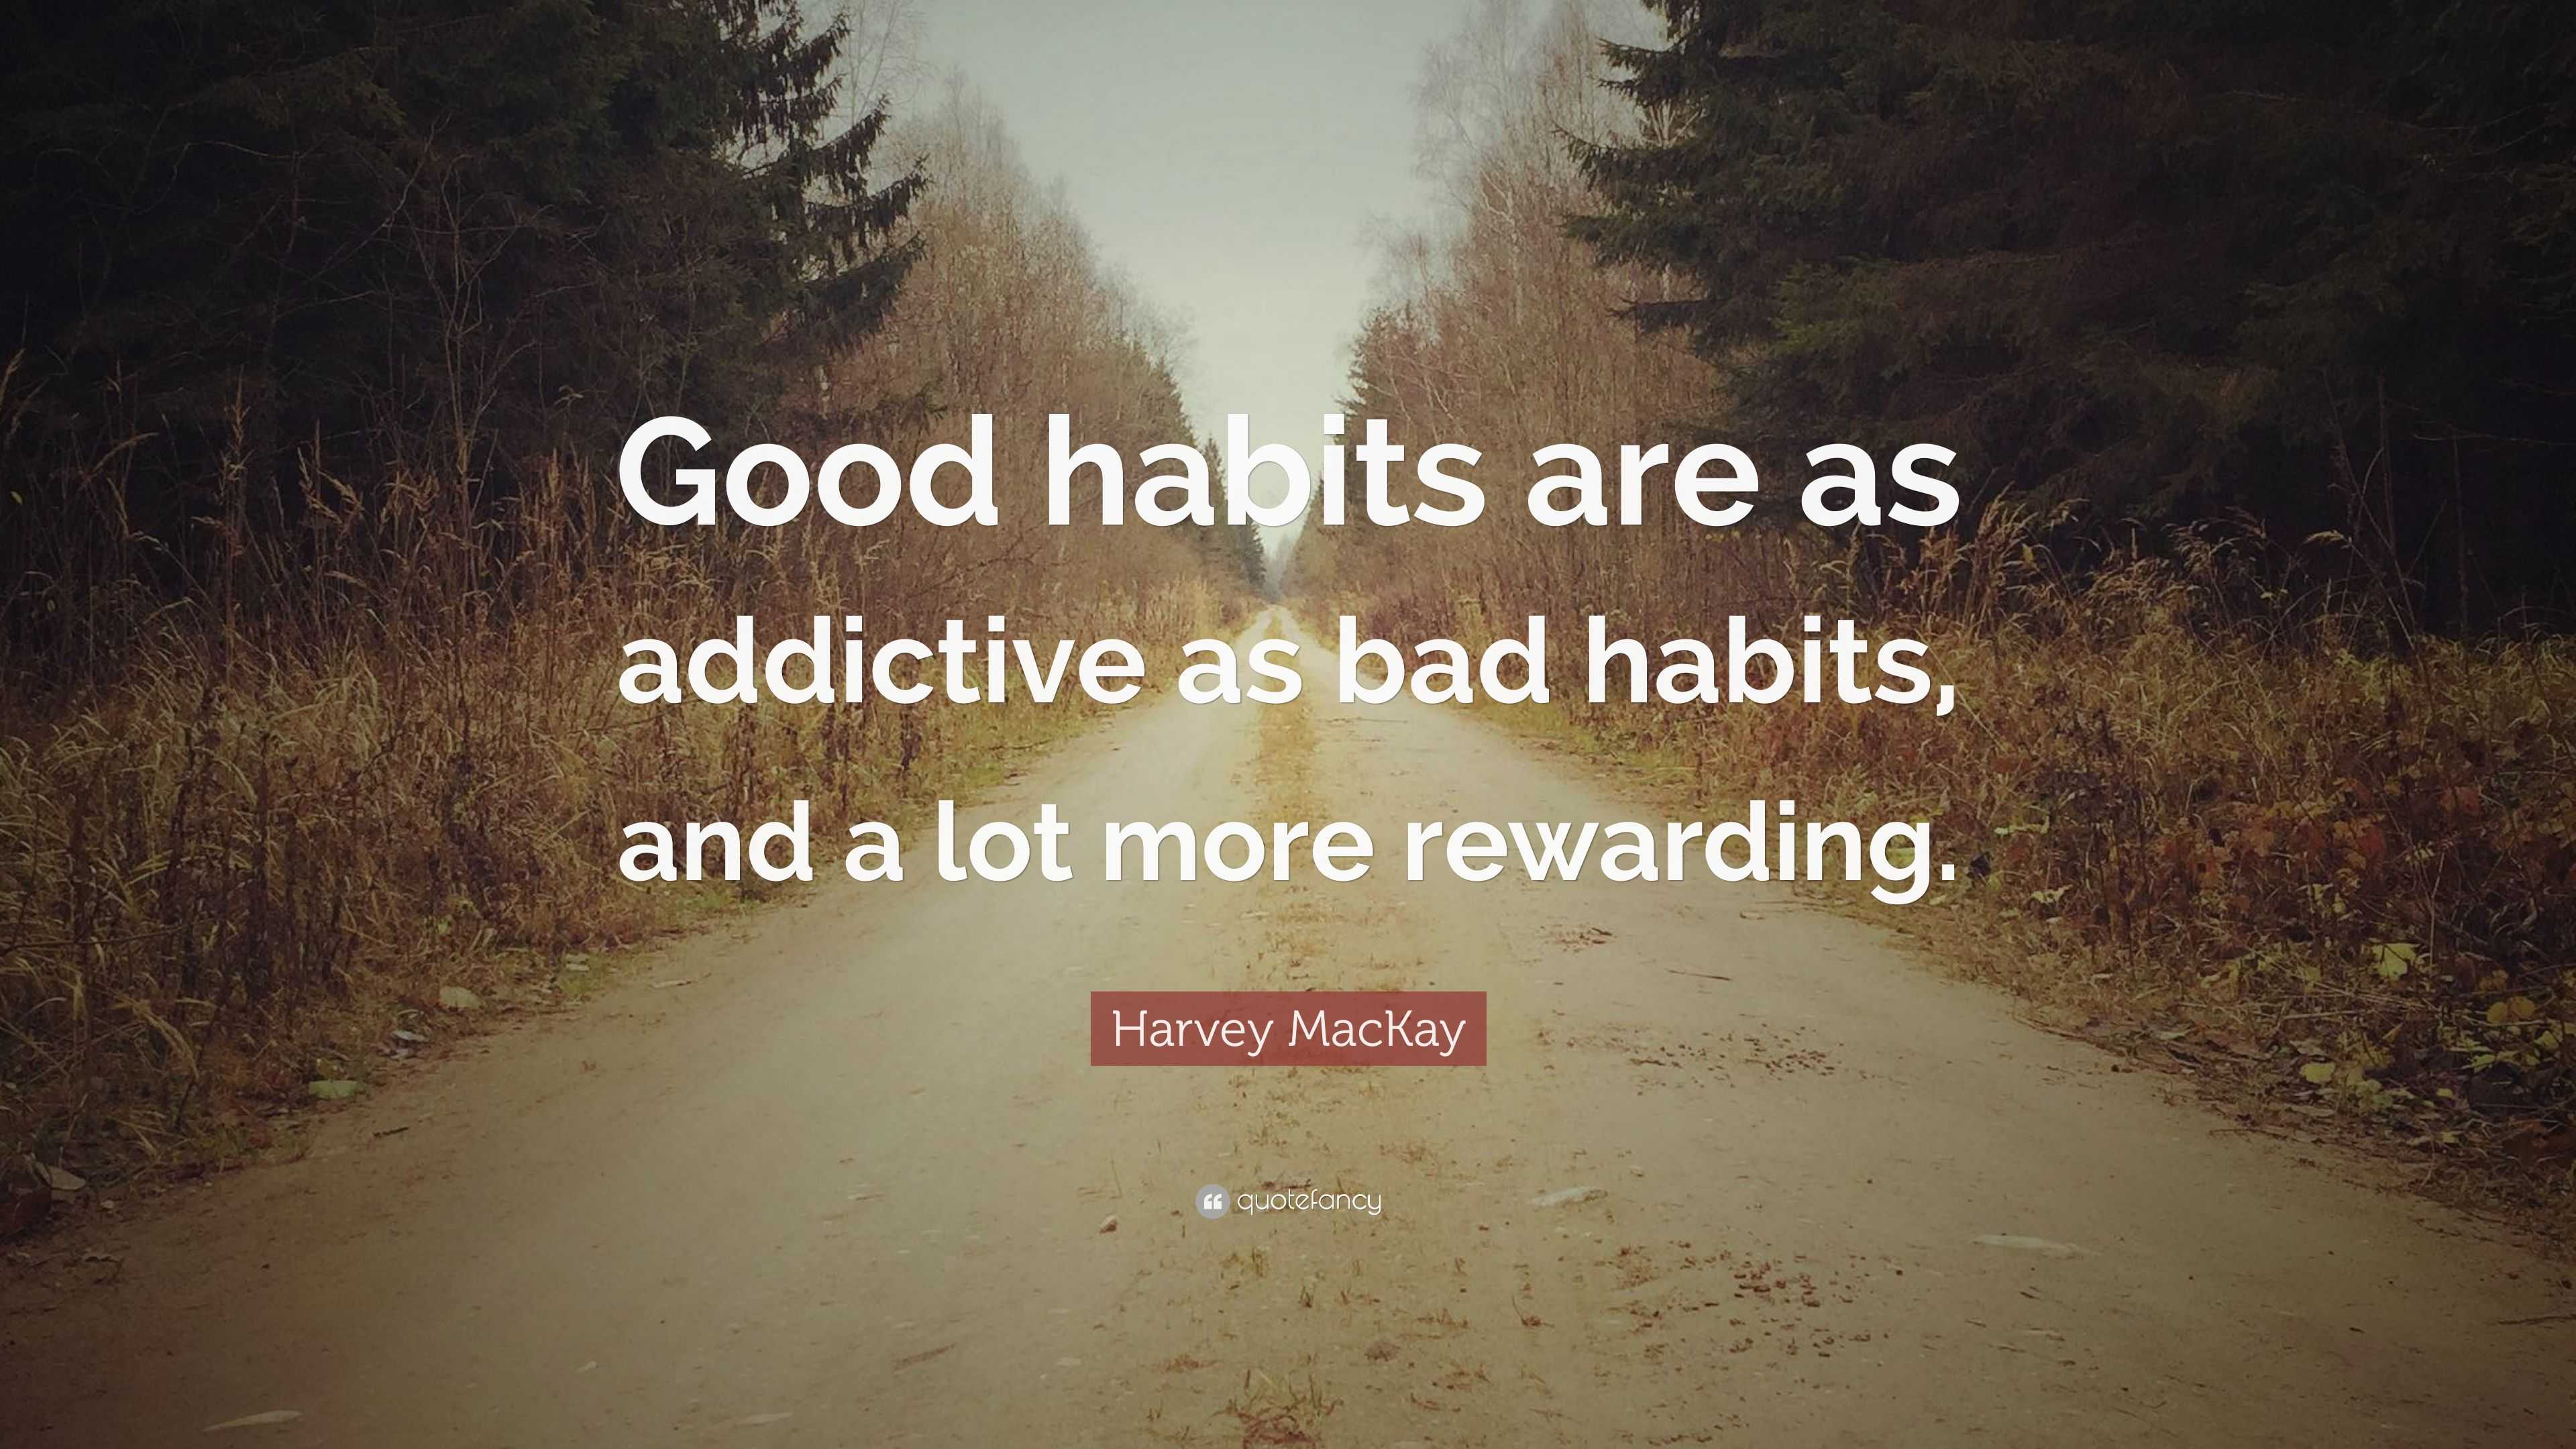 bad habits learned growing up poor